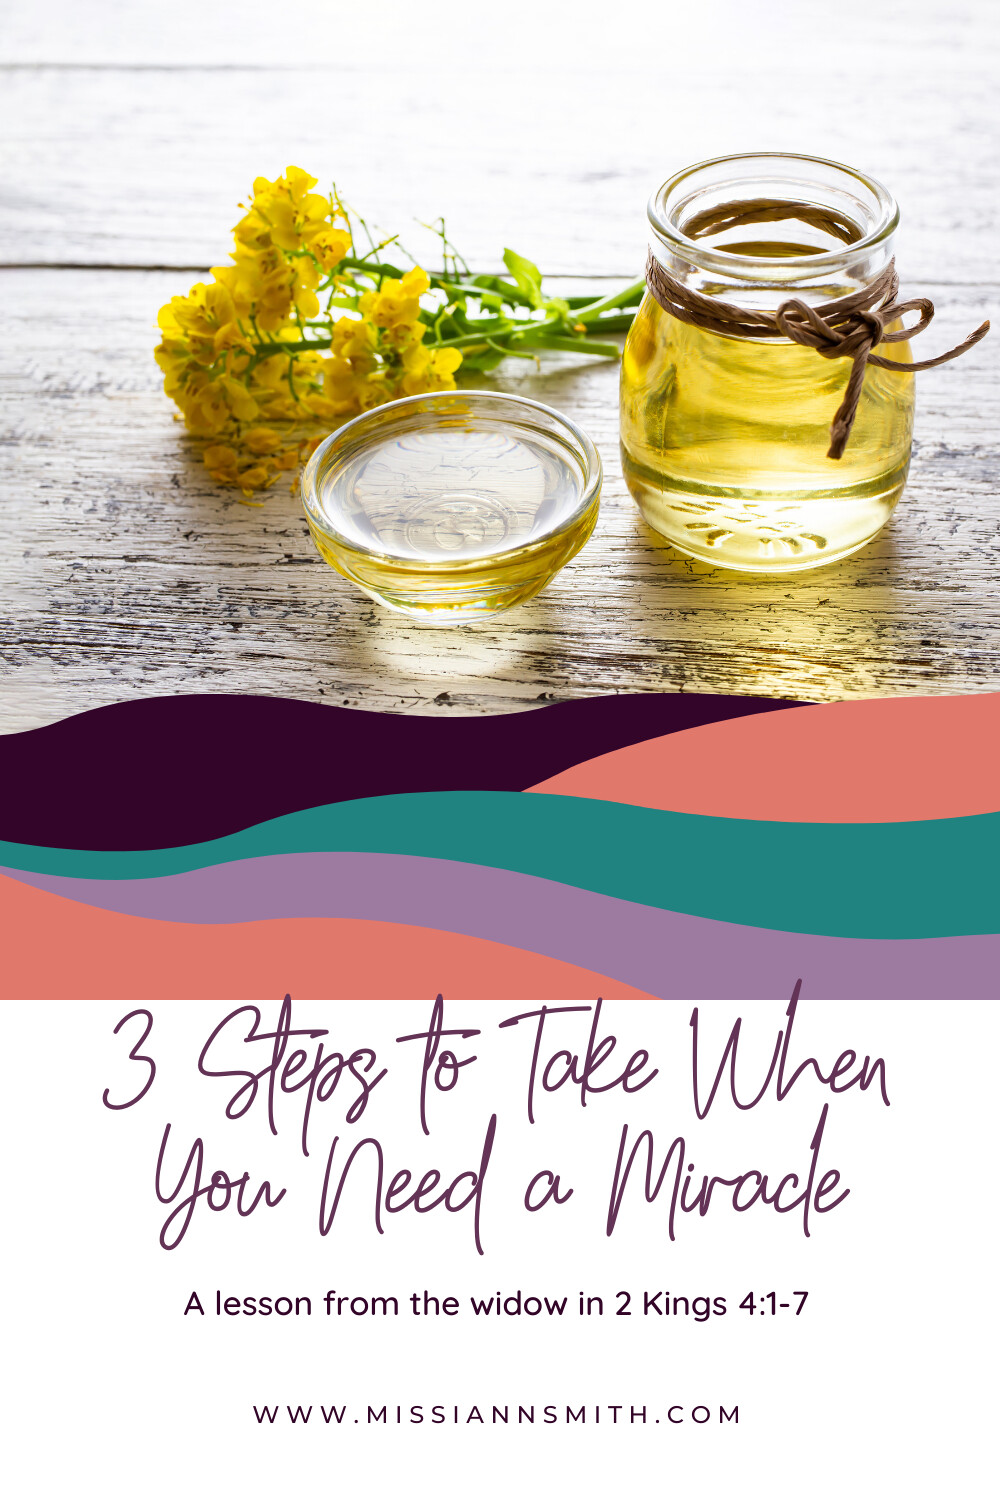 What to do when you need a miracle